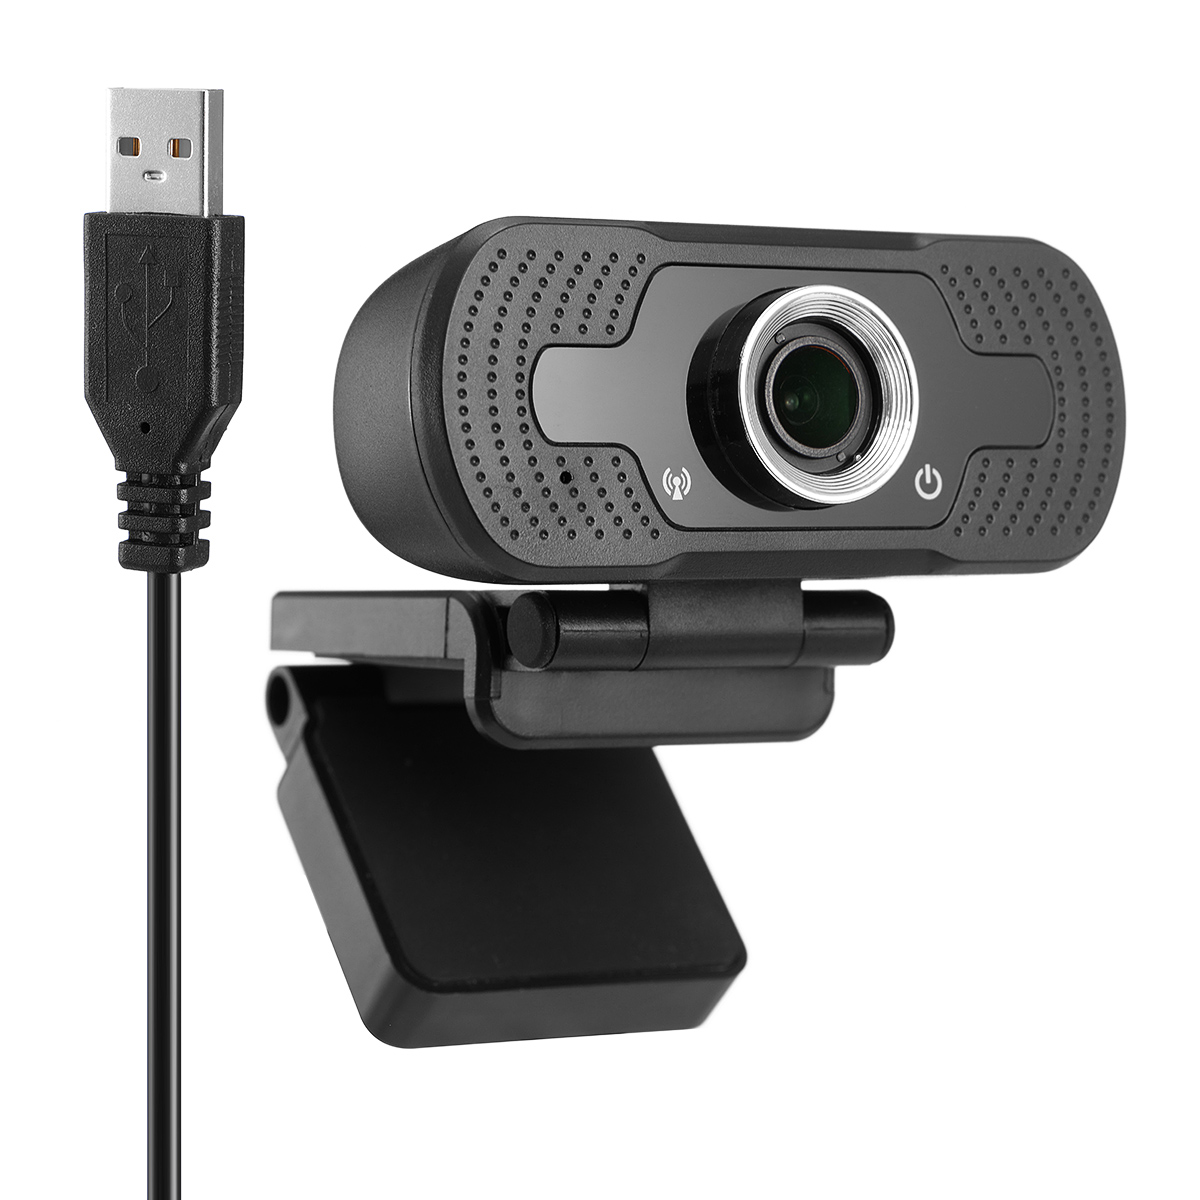 Find SAWAKE 1080P HD Webcam Auto Focus 30FPS USB Wired Foldable Computer Camera with Built in Microphone for Sale on Gipsybee.com with cryptocurrencies